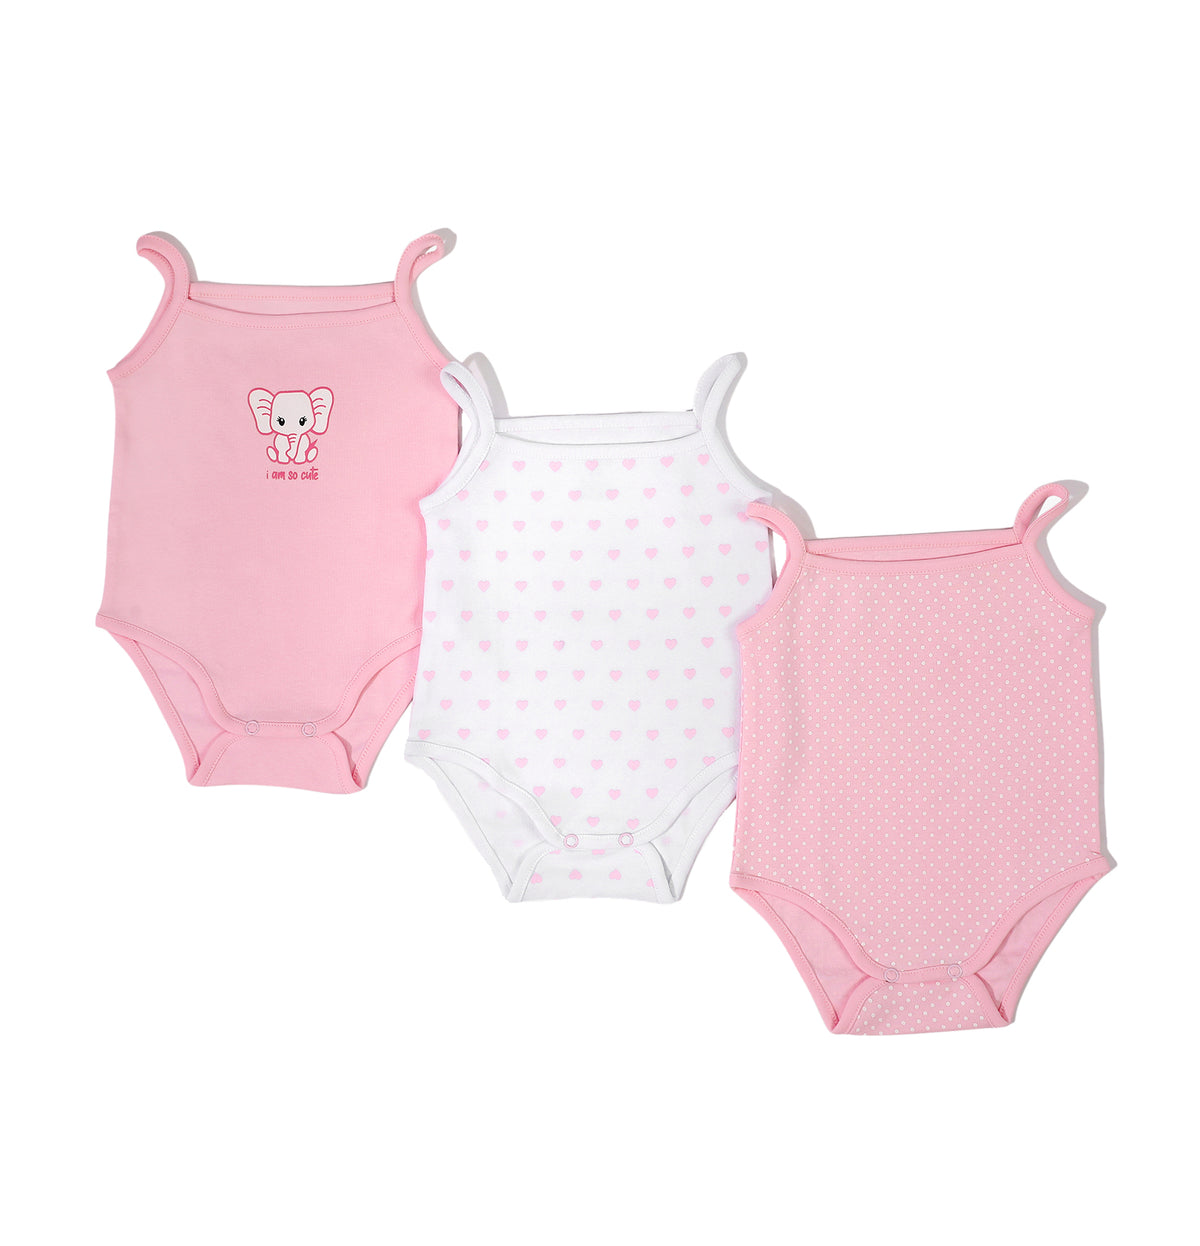 Cute colorful sleeveless baby girl set of 3 overalls by Pompelo